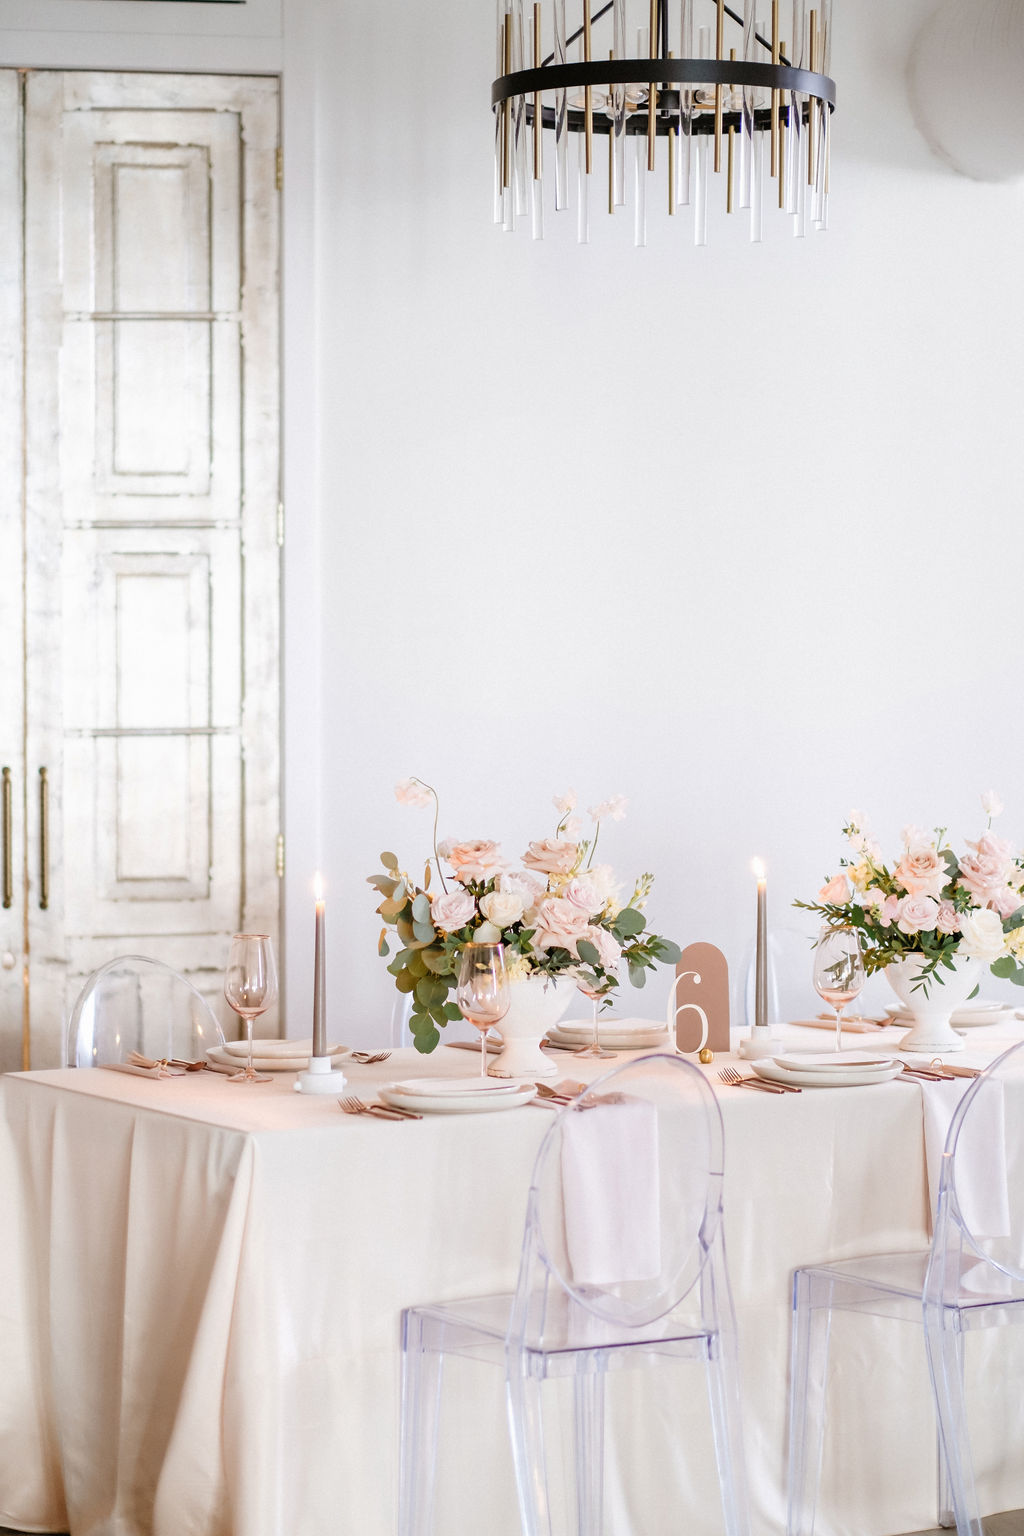 Contemporary wedding styling at Venue 308 featuring pink and orange floral design